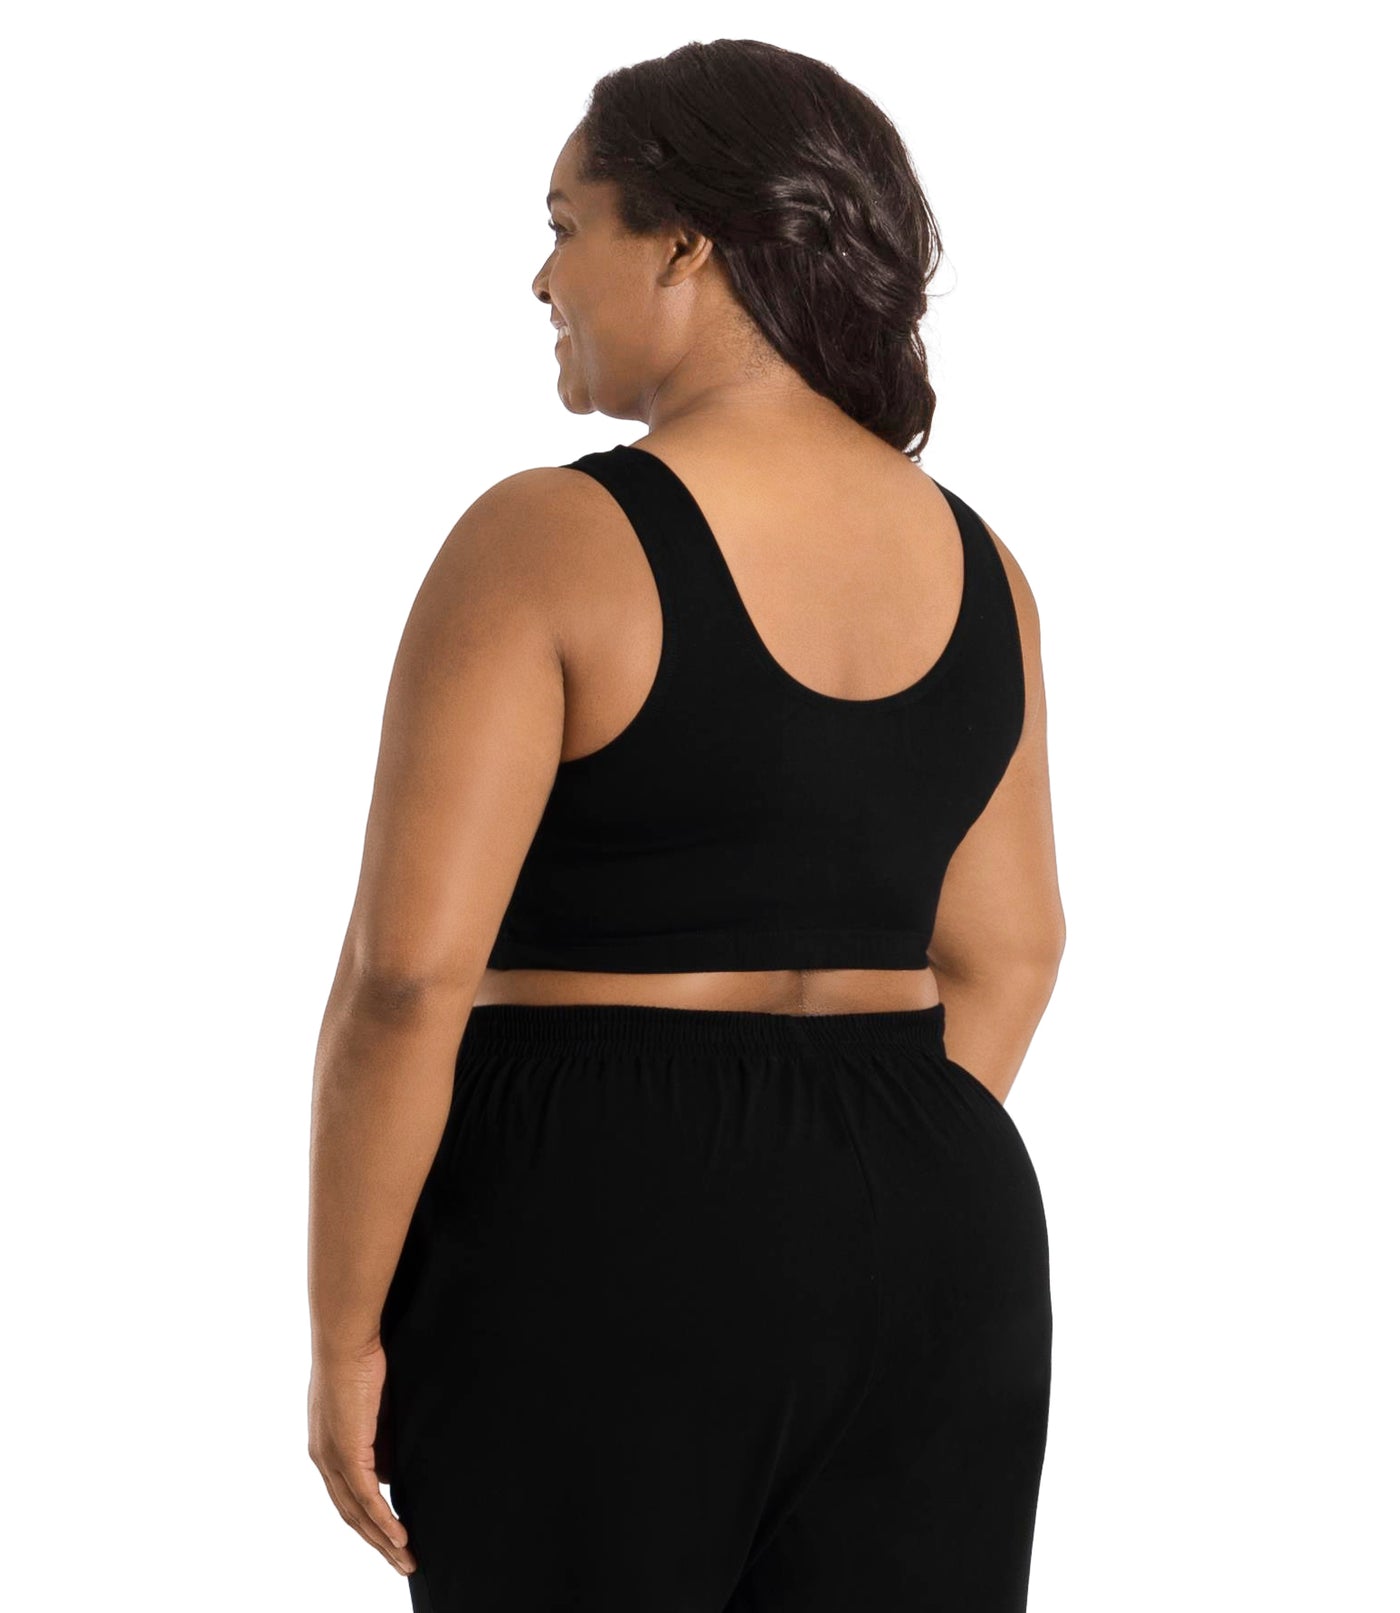 Plus size woman, facing back, wearing JunoActive plus size Stretch Naturals Scoop Neck Bra in black. The woman is wearing black JunoActive plus size bottoms. Her arms fall naturally to her side.